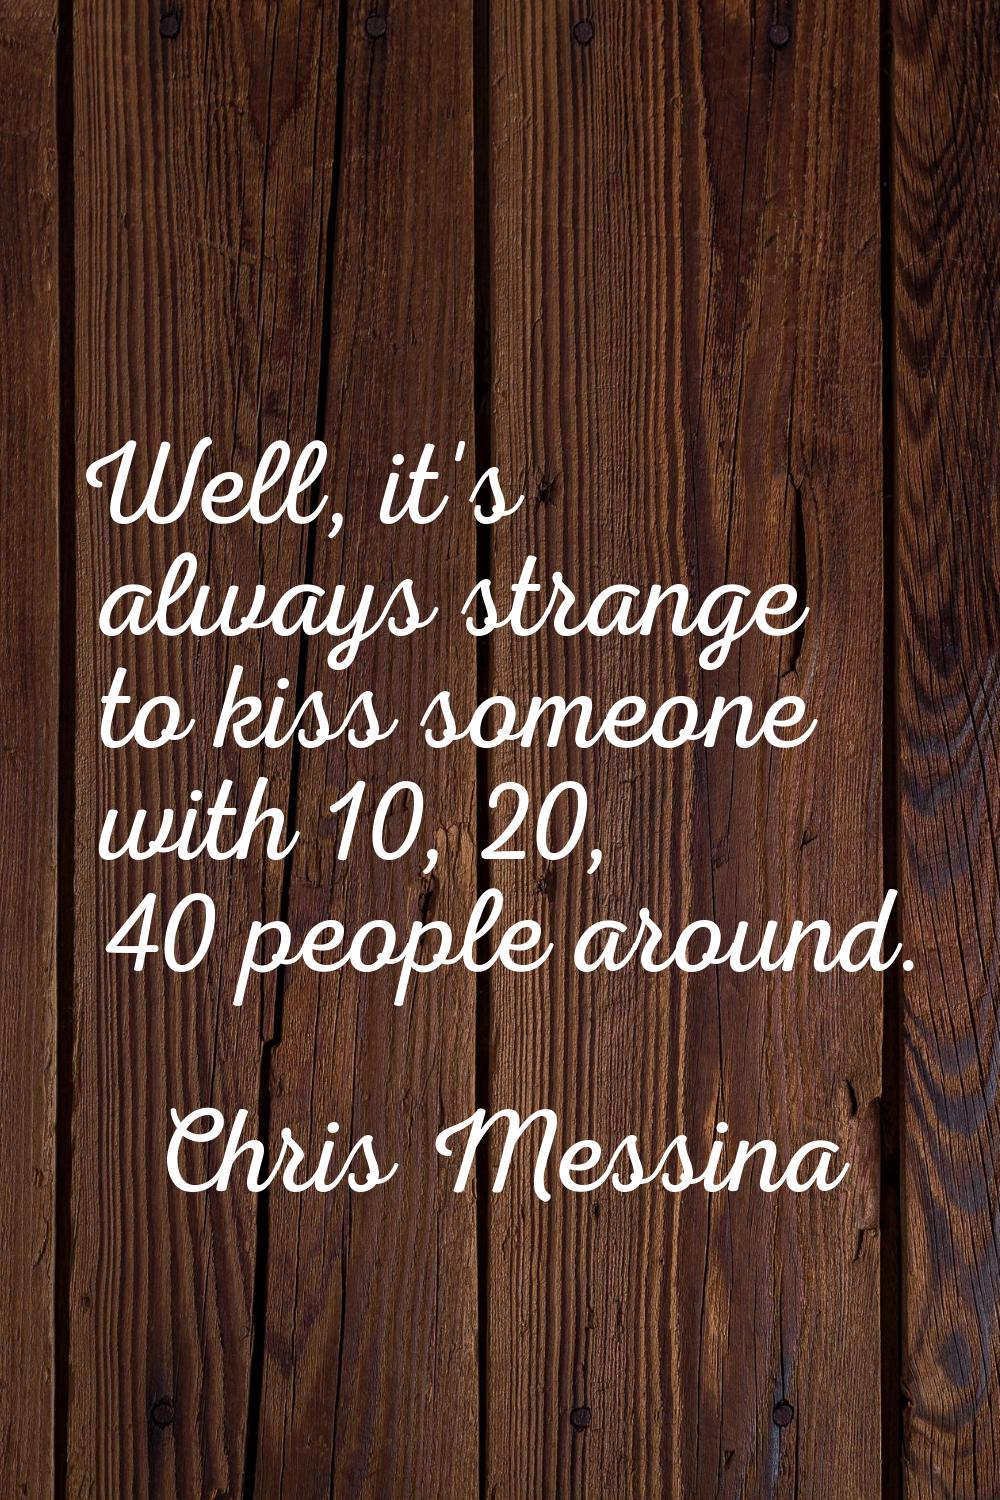 Well, it's always strange to kiss someone with 10, 20, 40 people around.